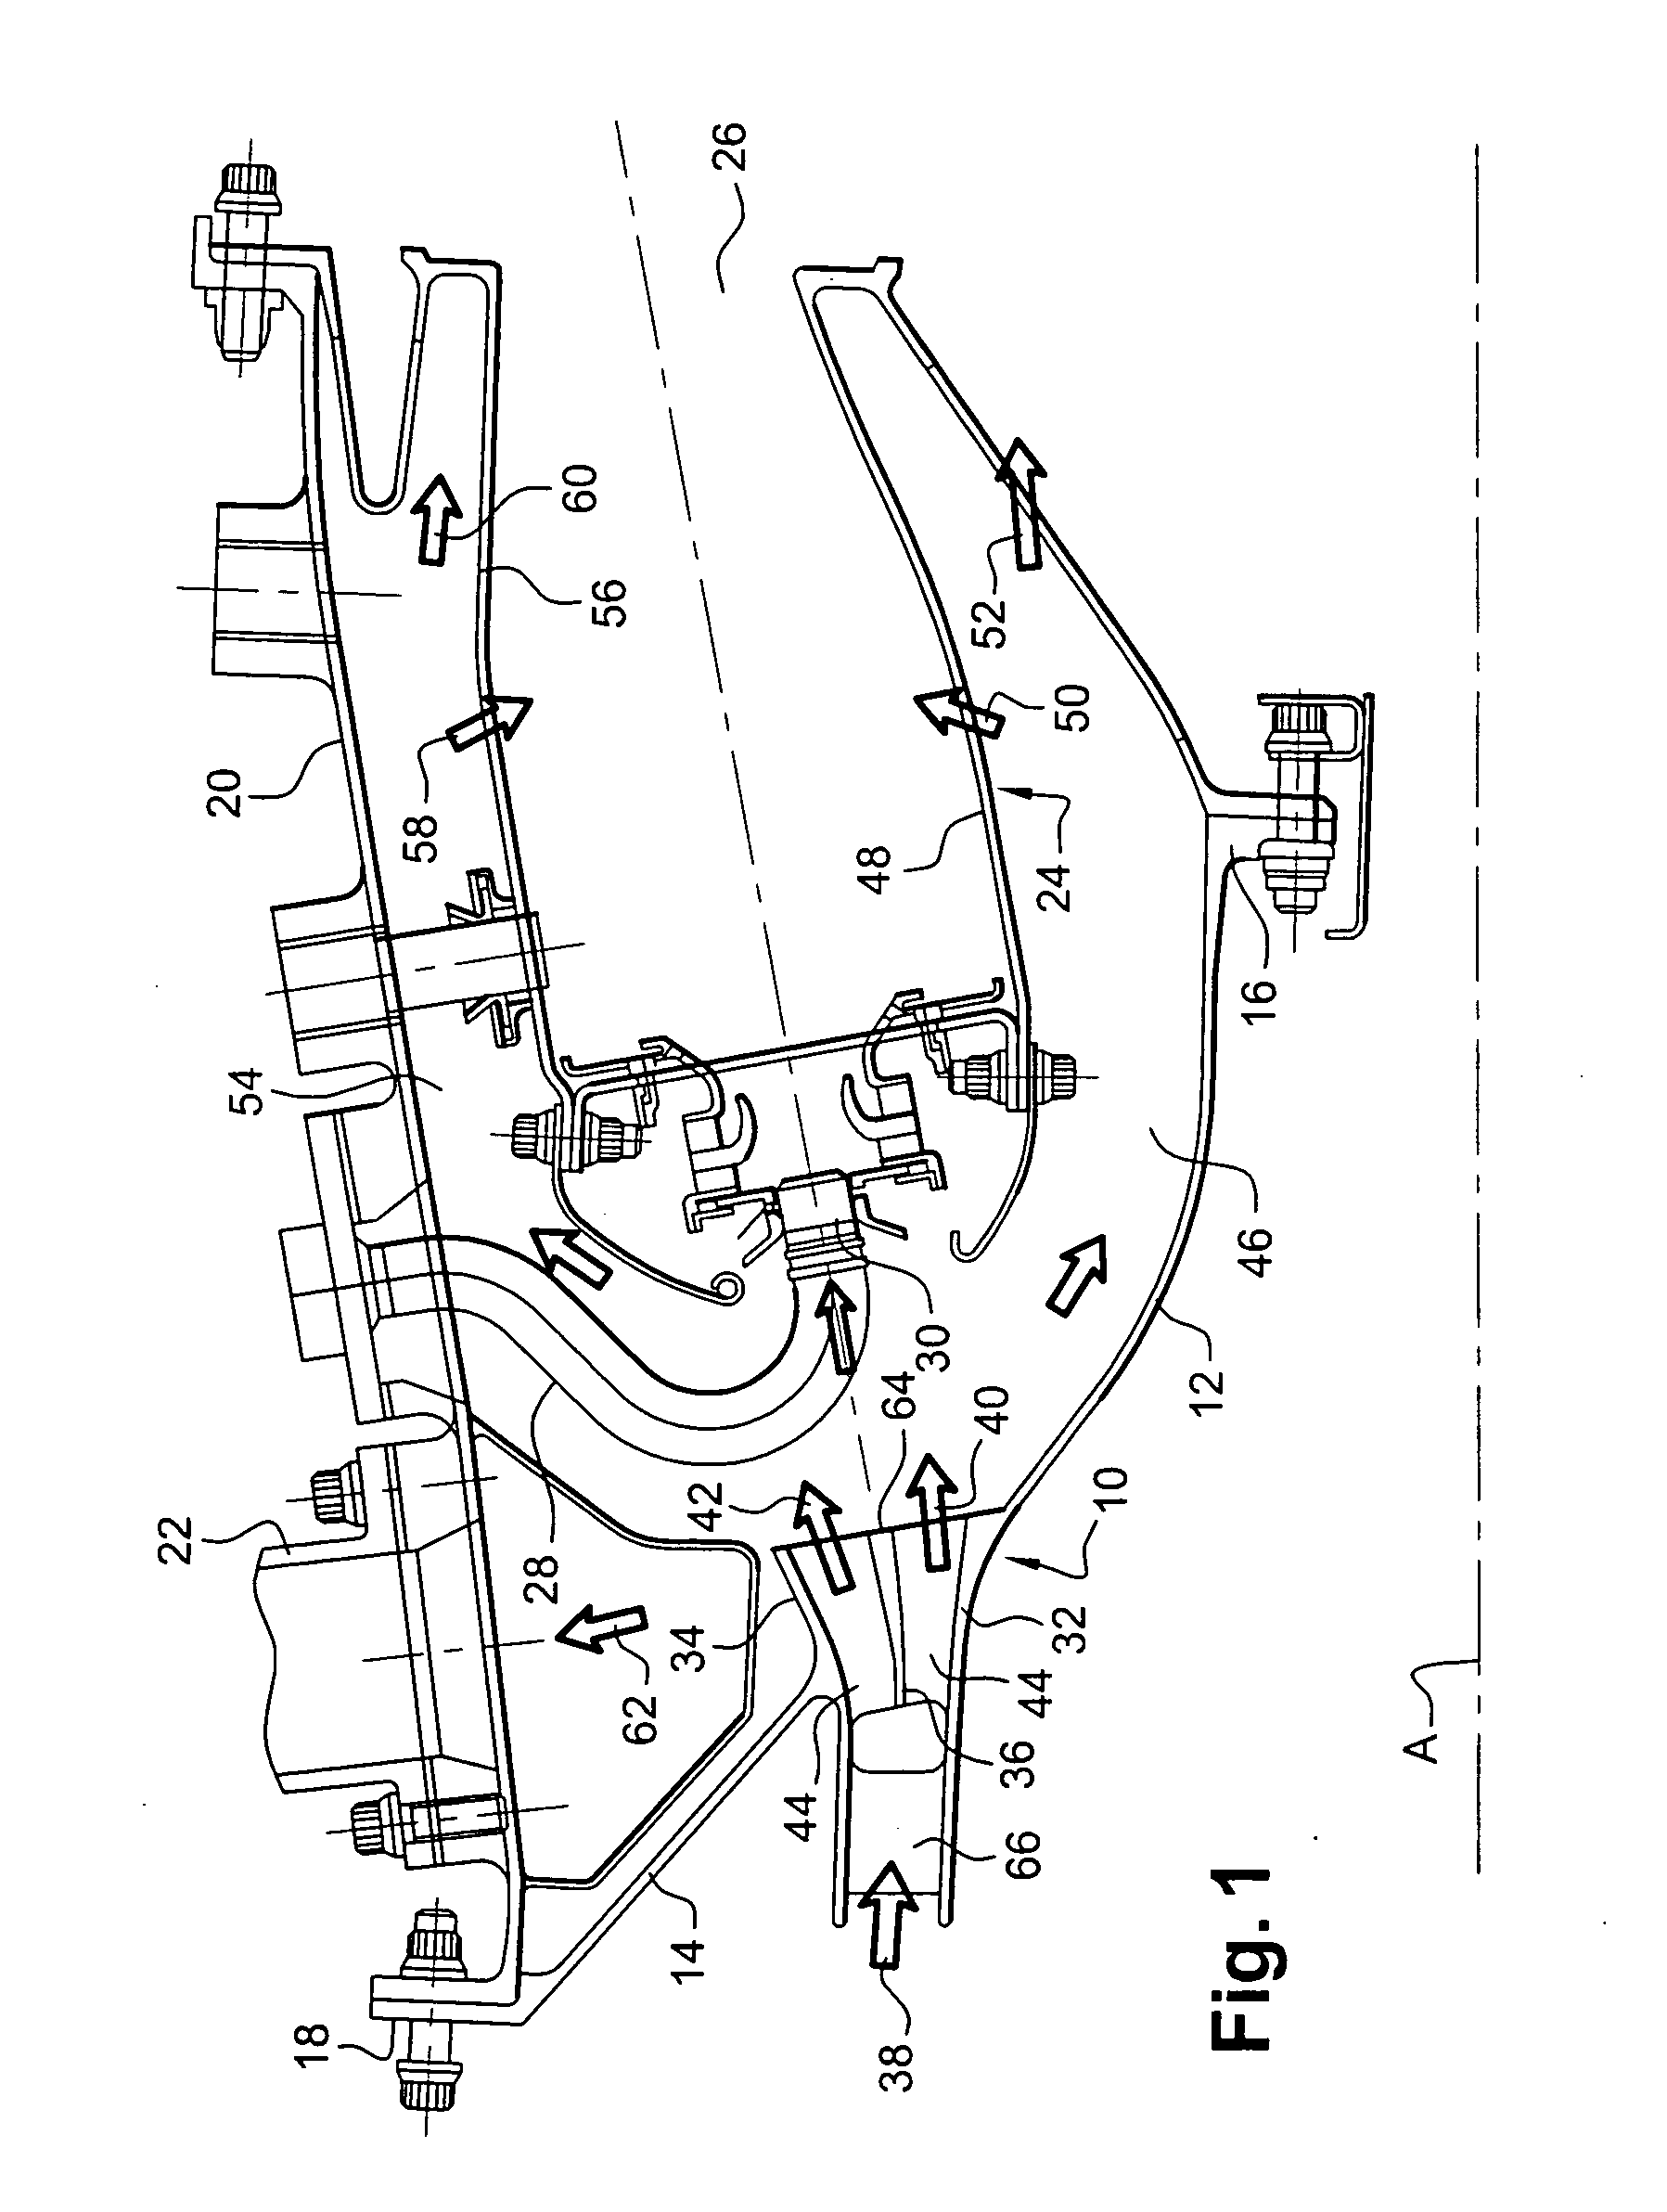 Diffuser for an annular combustion chamber, in particular for an airplane turbine engine